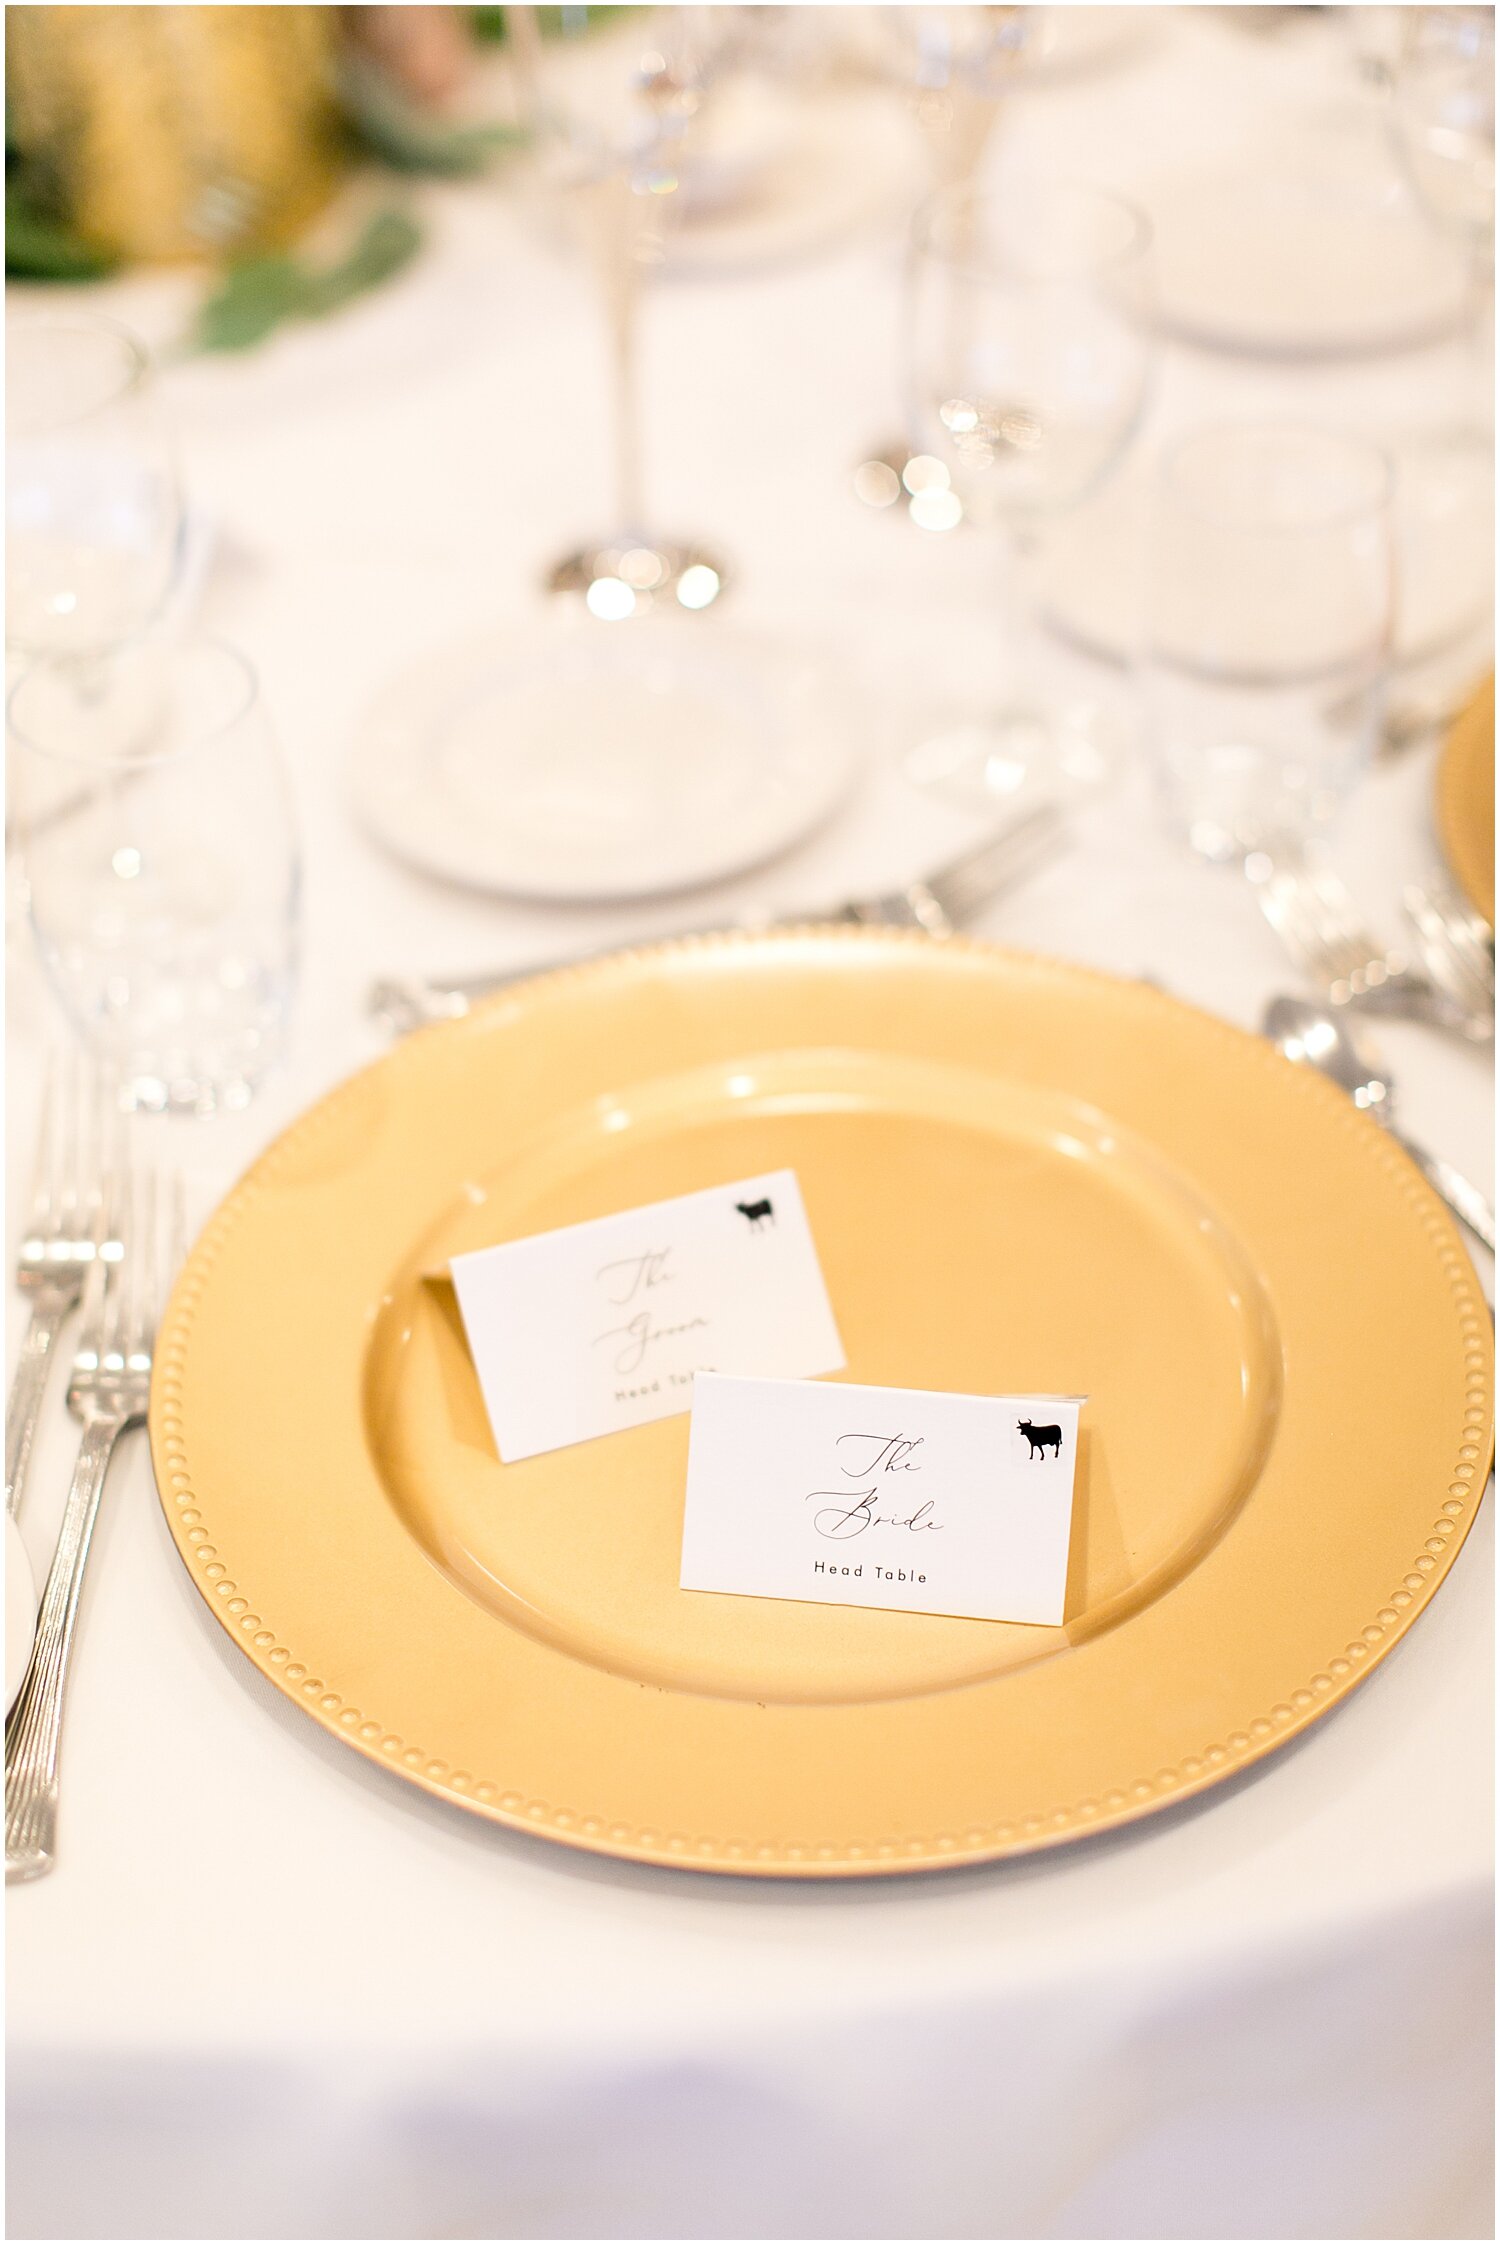  gold chargers for table setting 